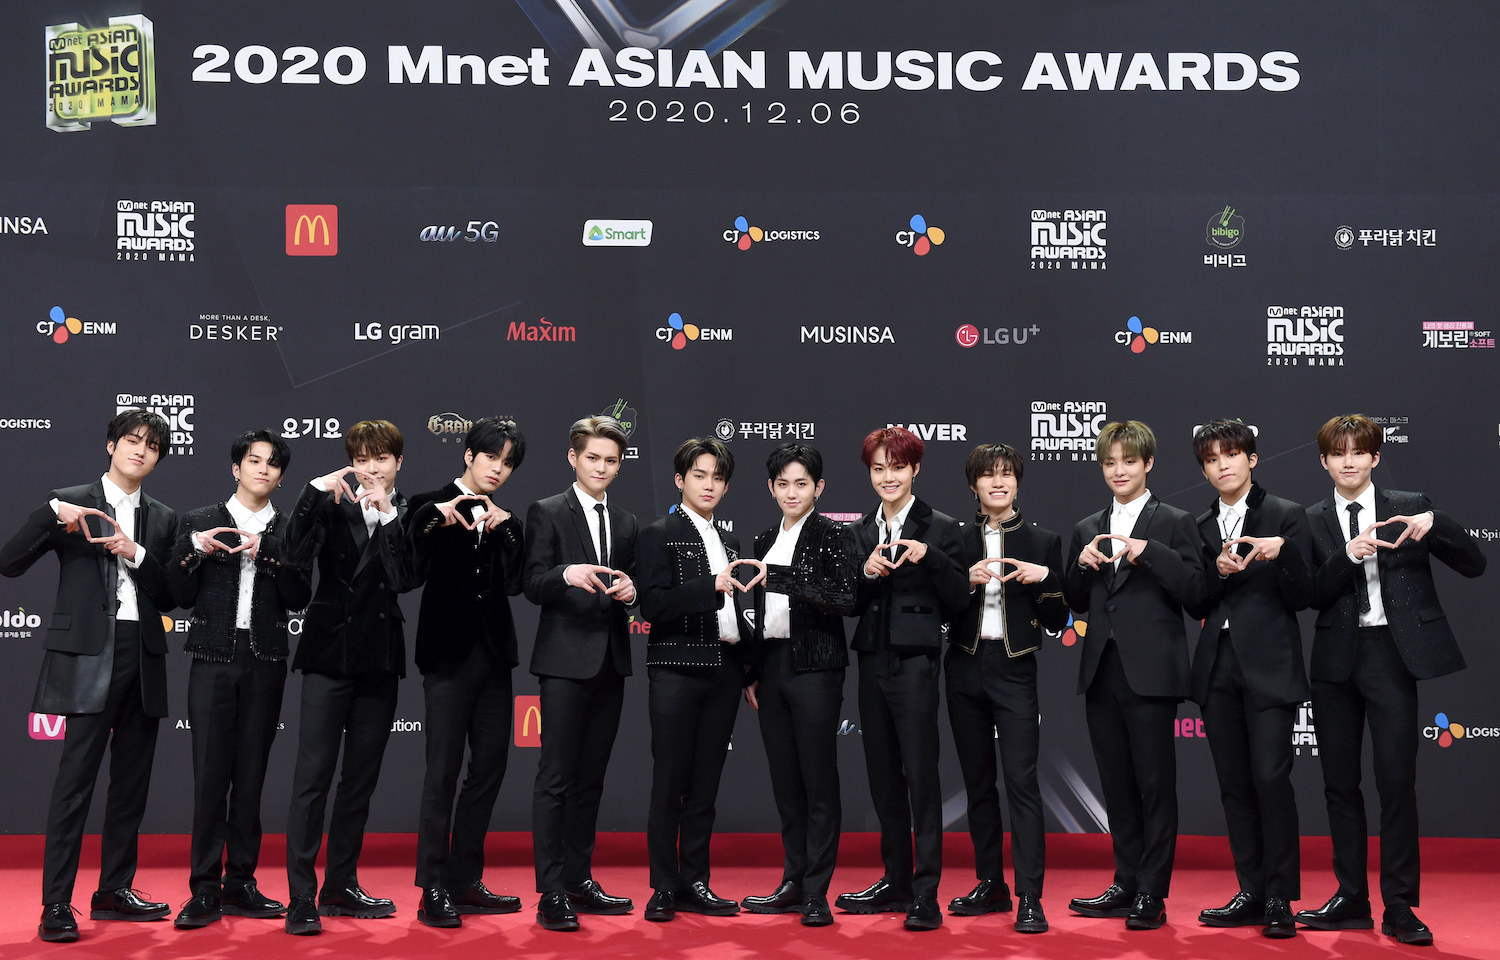 Treasure, wearing suits, attends the 2020 Mnet Asian Music Awards